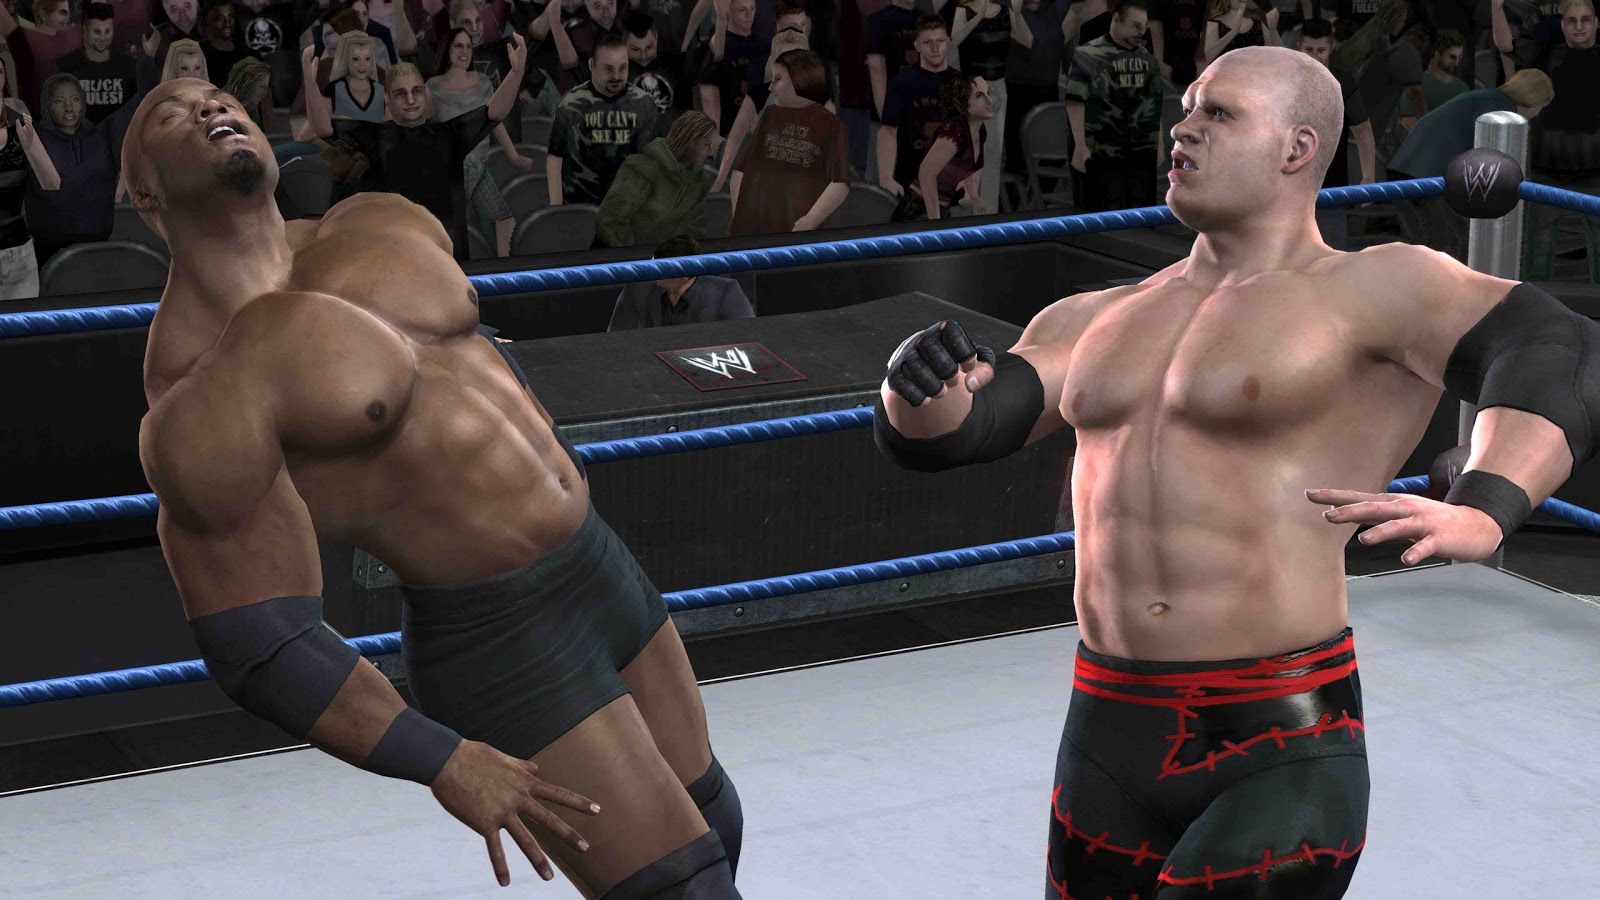 Download Games WWE Smackdown VS Raw For Free | GAMES FREE